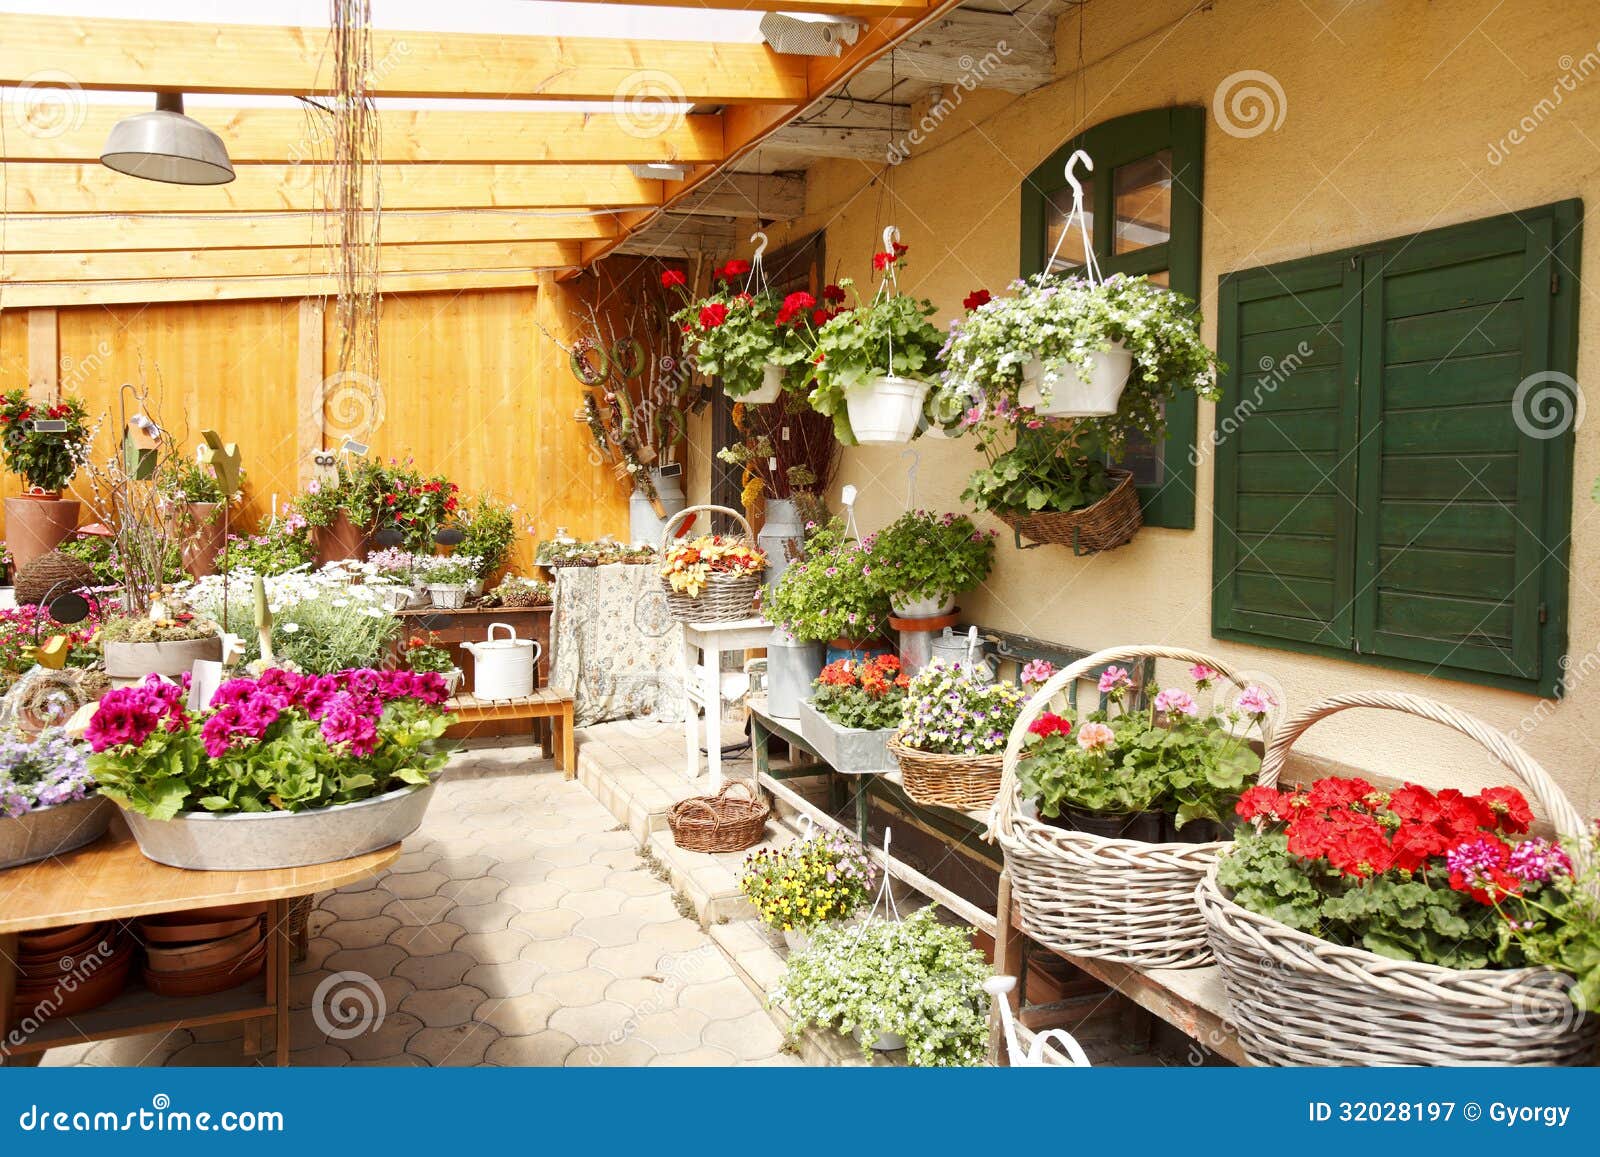 Flower Shop Interior Royalty Free Stock Photography - Image: 32028197